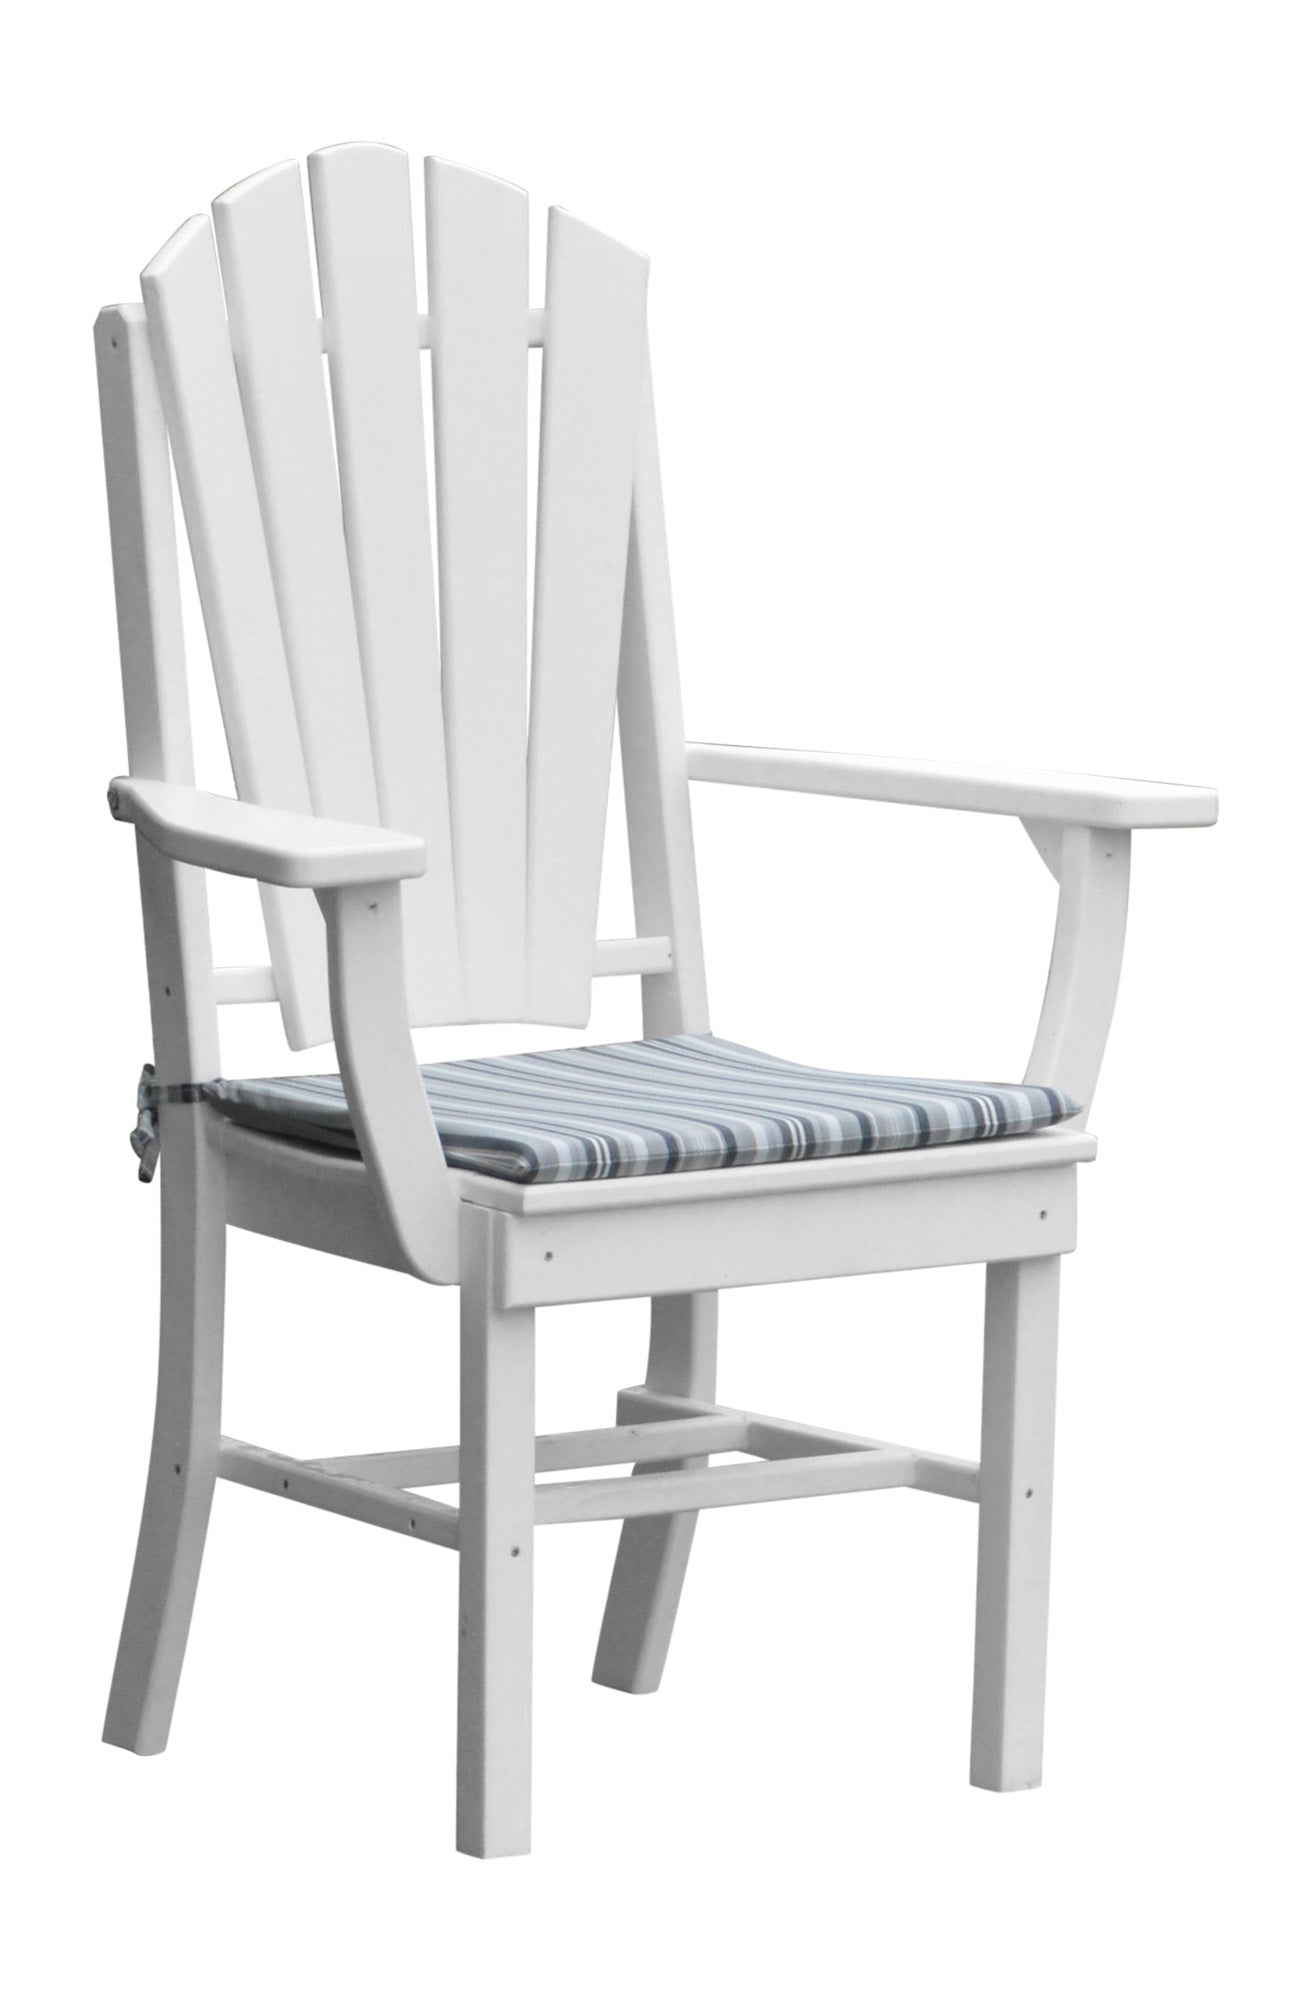 A&L Furniture Company Recycled Plastic Adirondack Dining Chair w/Arms - White